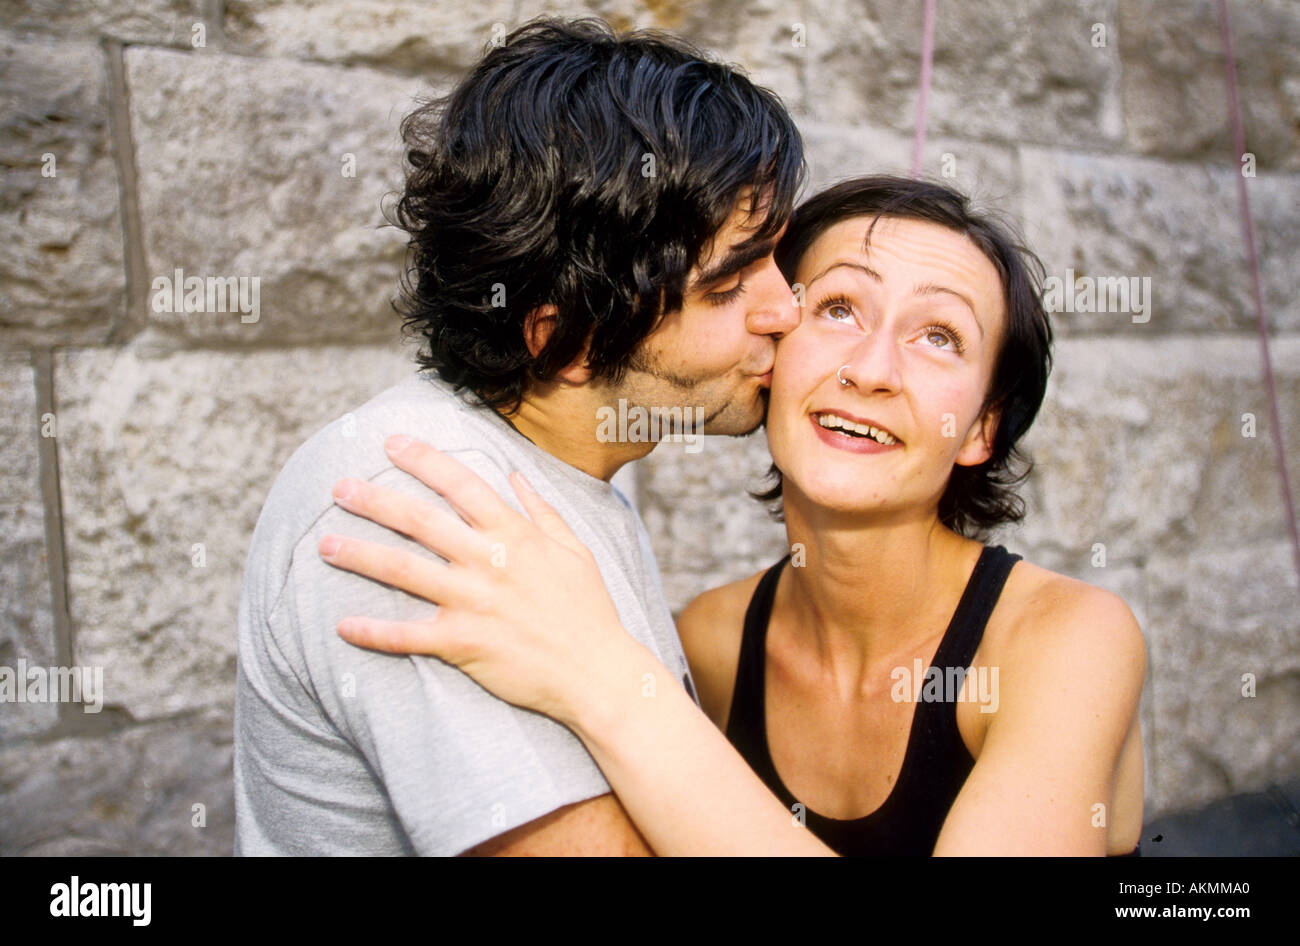 Germany Free time Young persons after climbing a man is kissing a woman on her cheek  Stock Photo